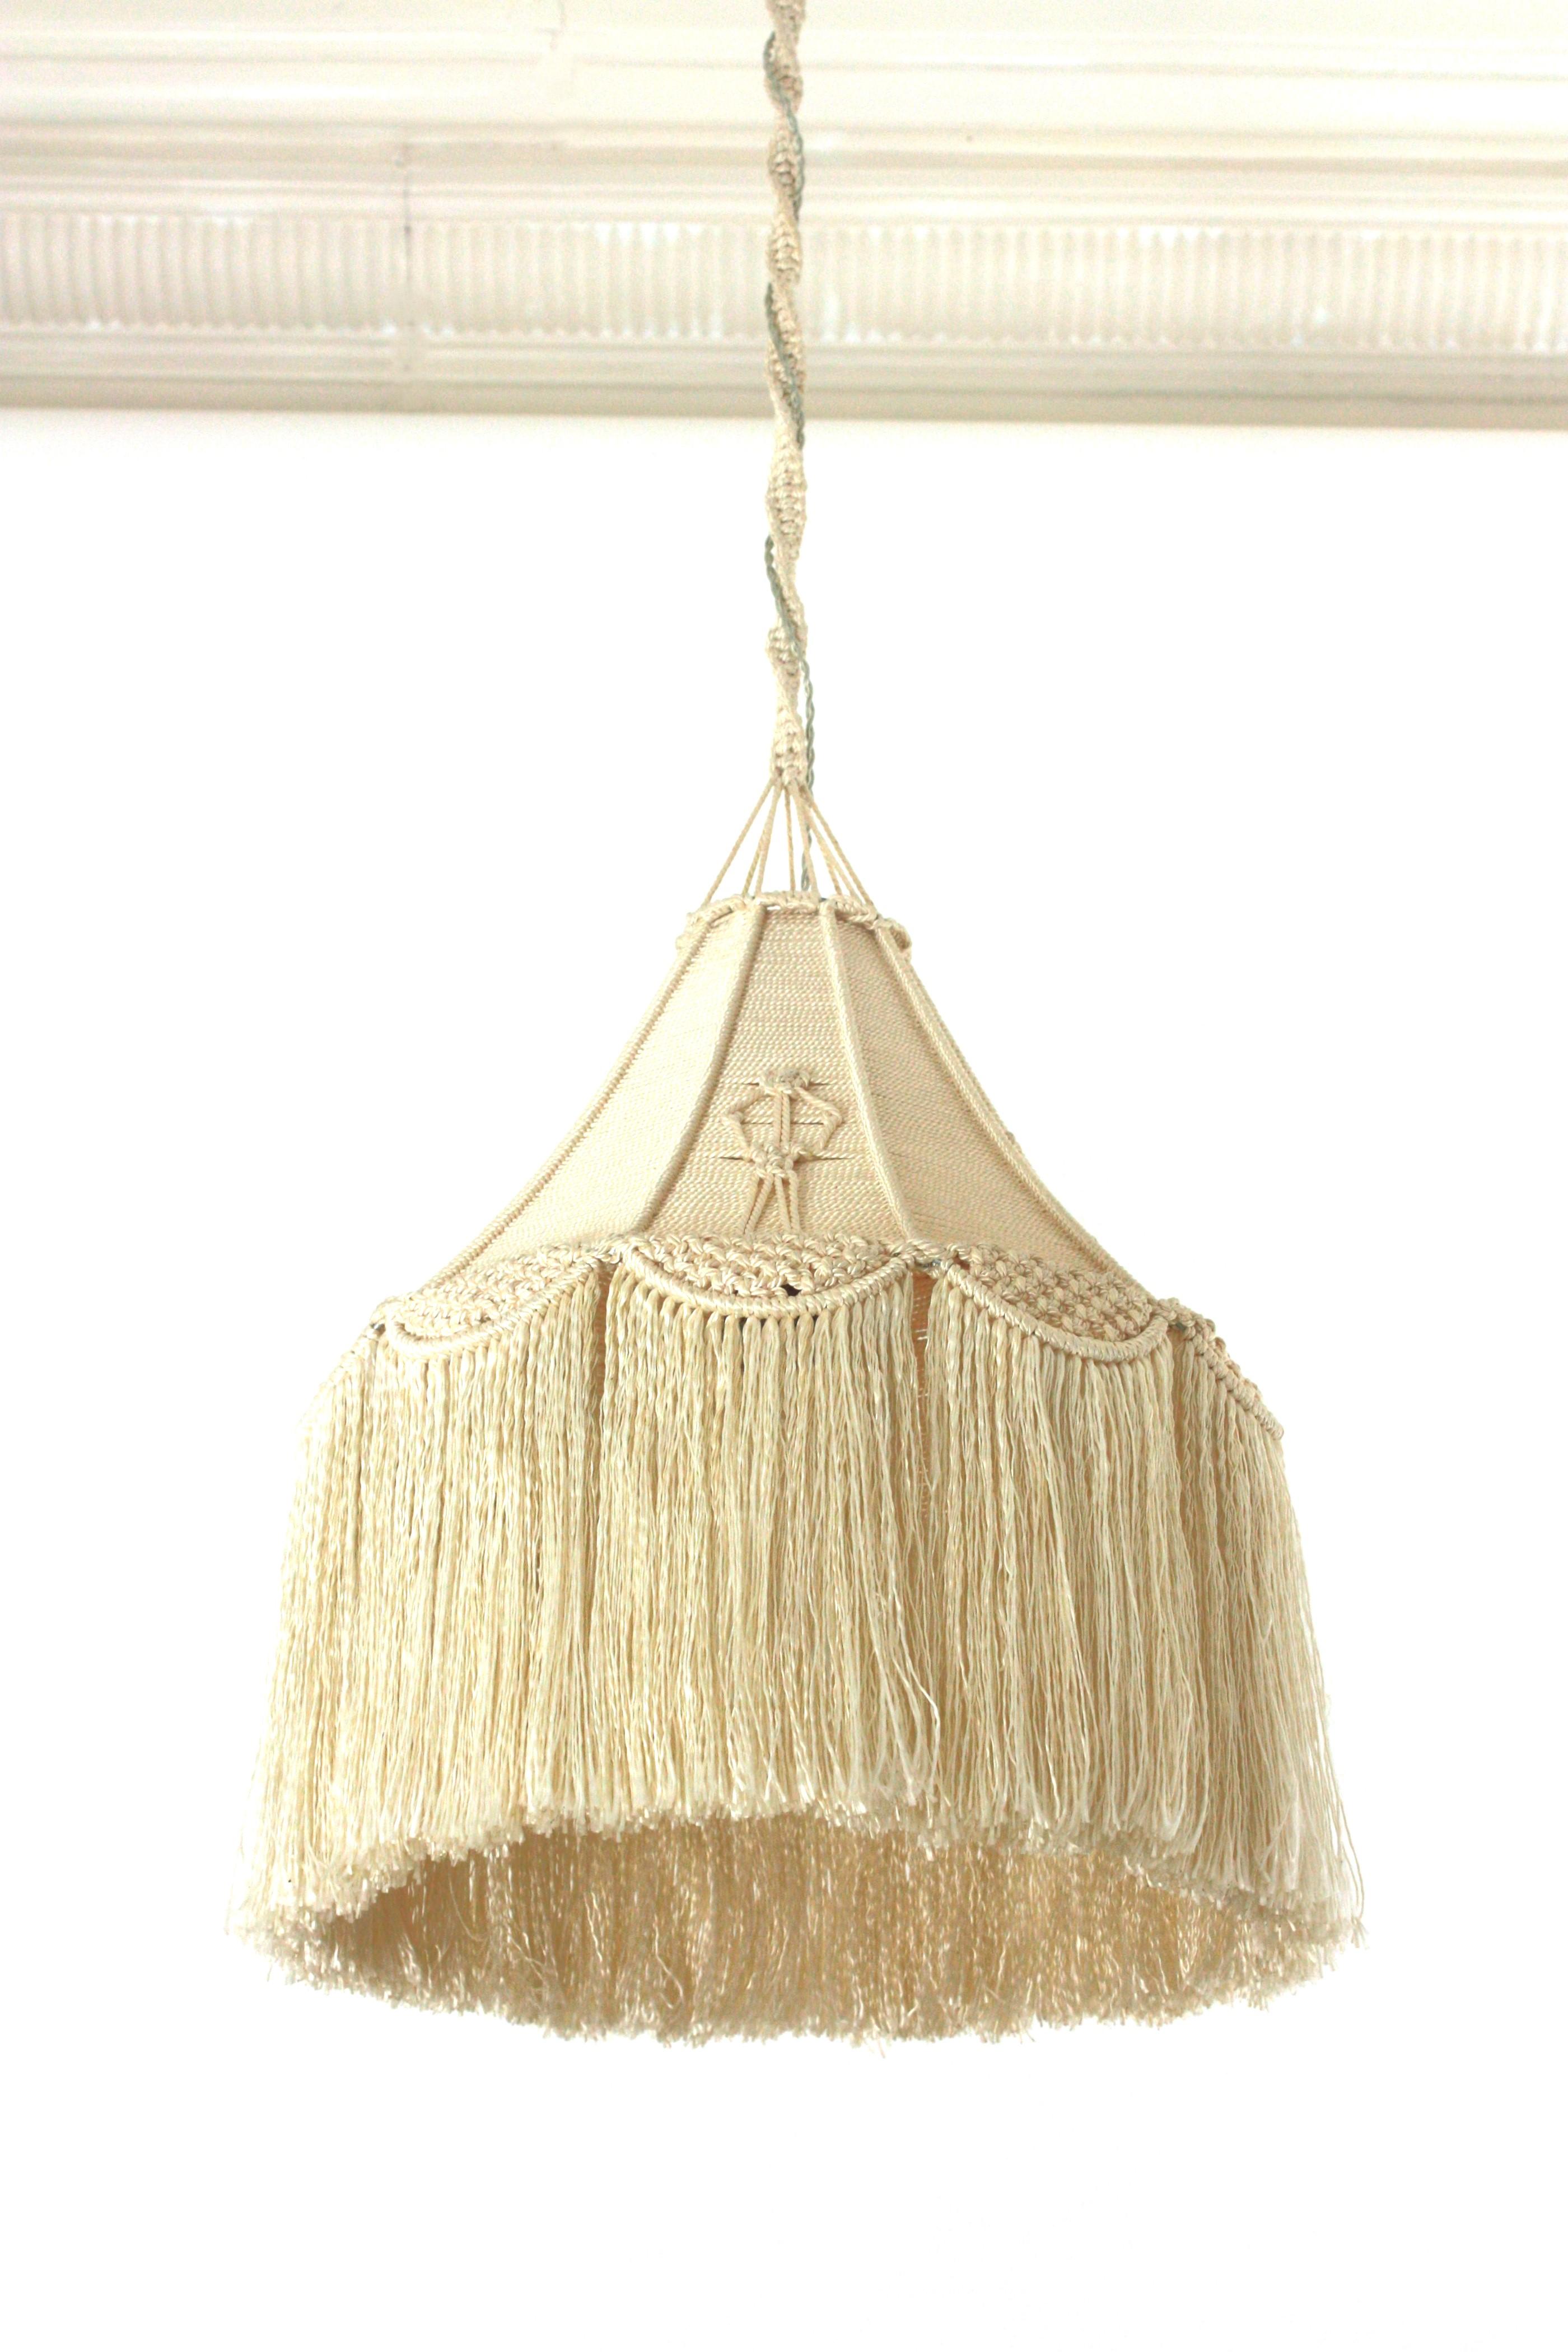 Spanish Hand Knotted Macramé Cord Pendant Light-Ceiling Hanging Lamp
Lovely vintage original macramé fiber handcrafted cone shaped l lantern / pendant, Spain, 1960s-1970s.
This eye-catching lamp features a conical lampshade with hand braided and